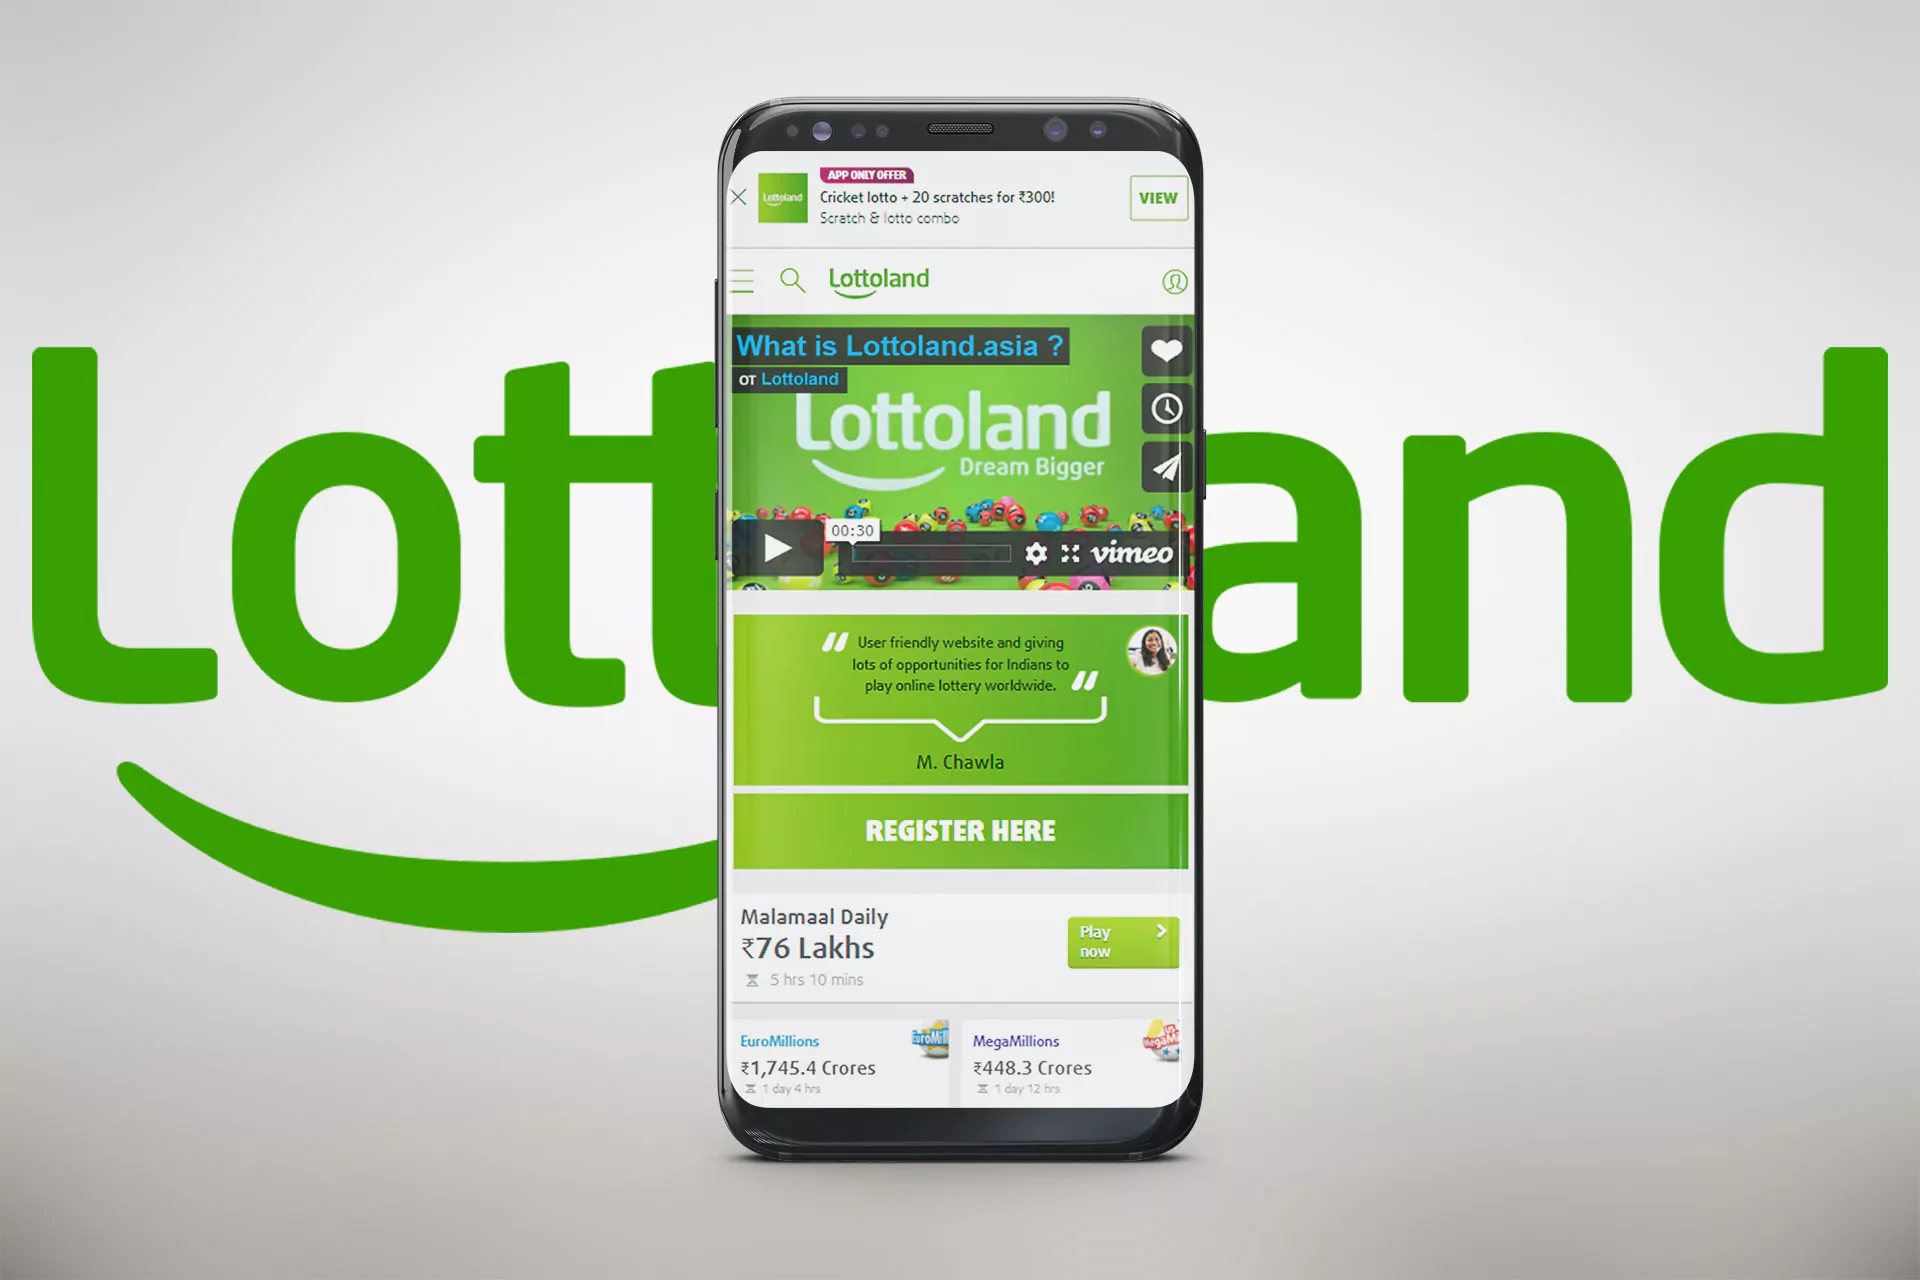 Find more than 30 lotteries in Lottoland.